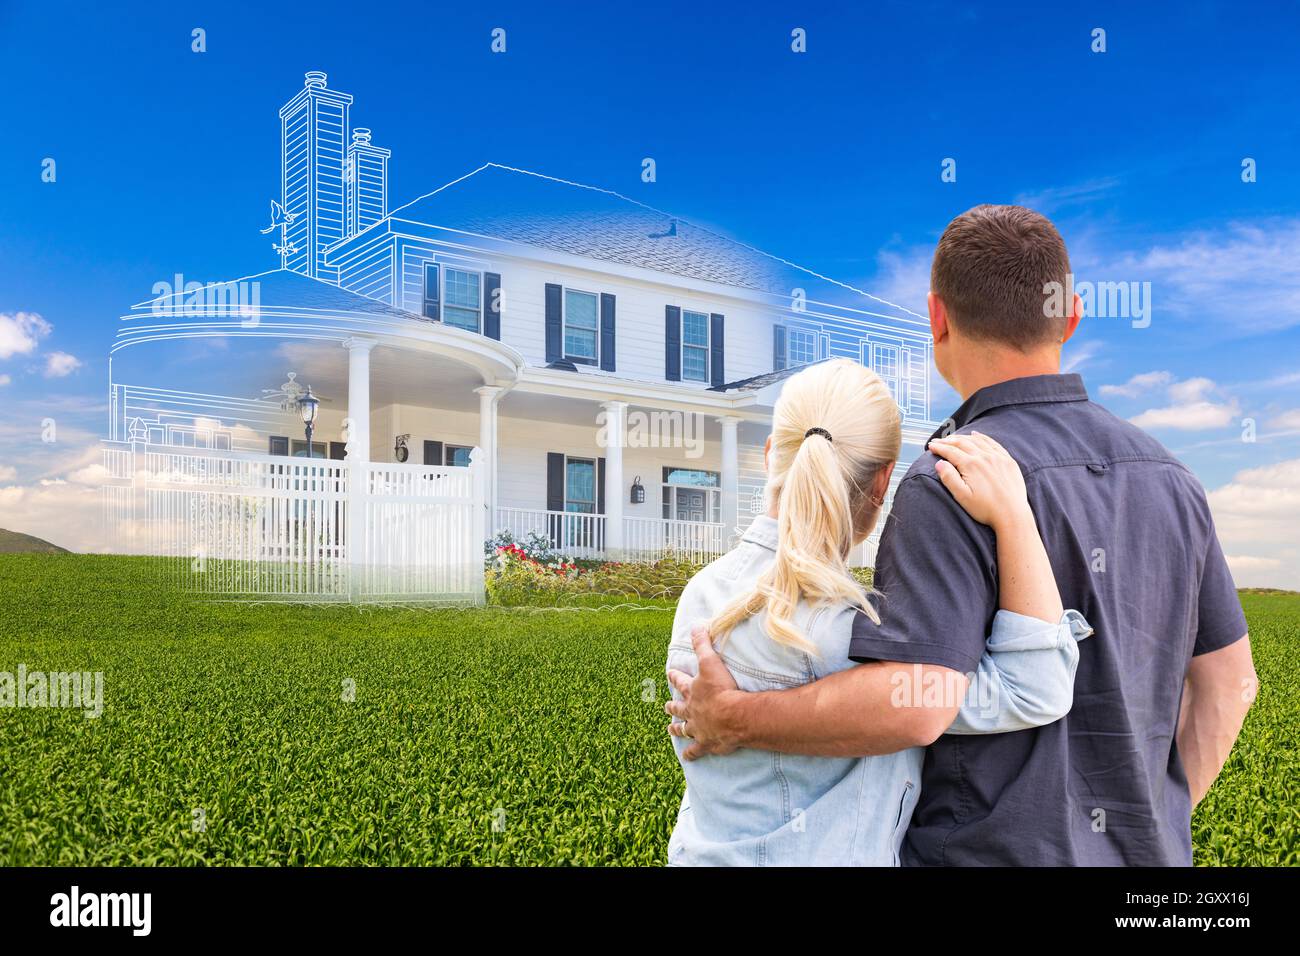 Couple Facing Ghosted House Drawing and Photo Over Green Landscape. Stock Photo